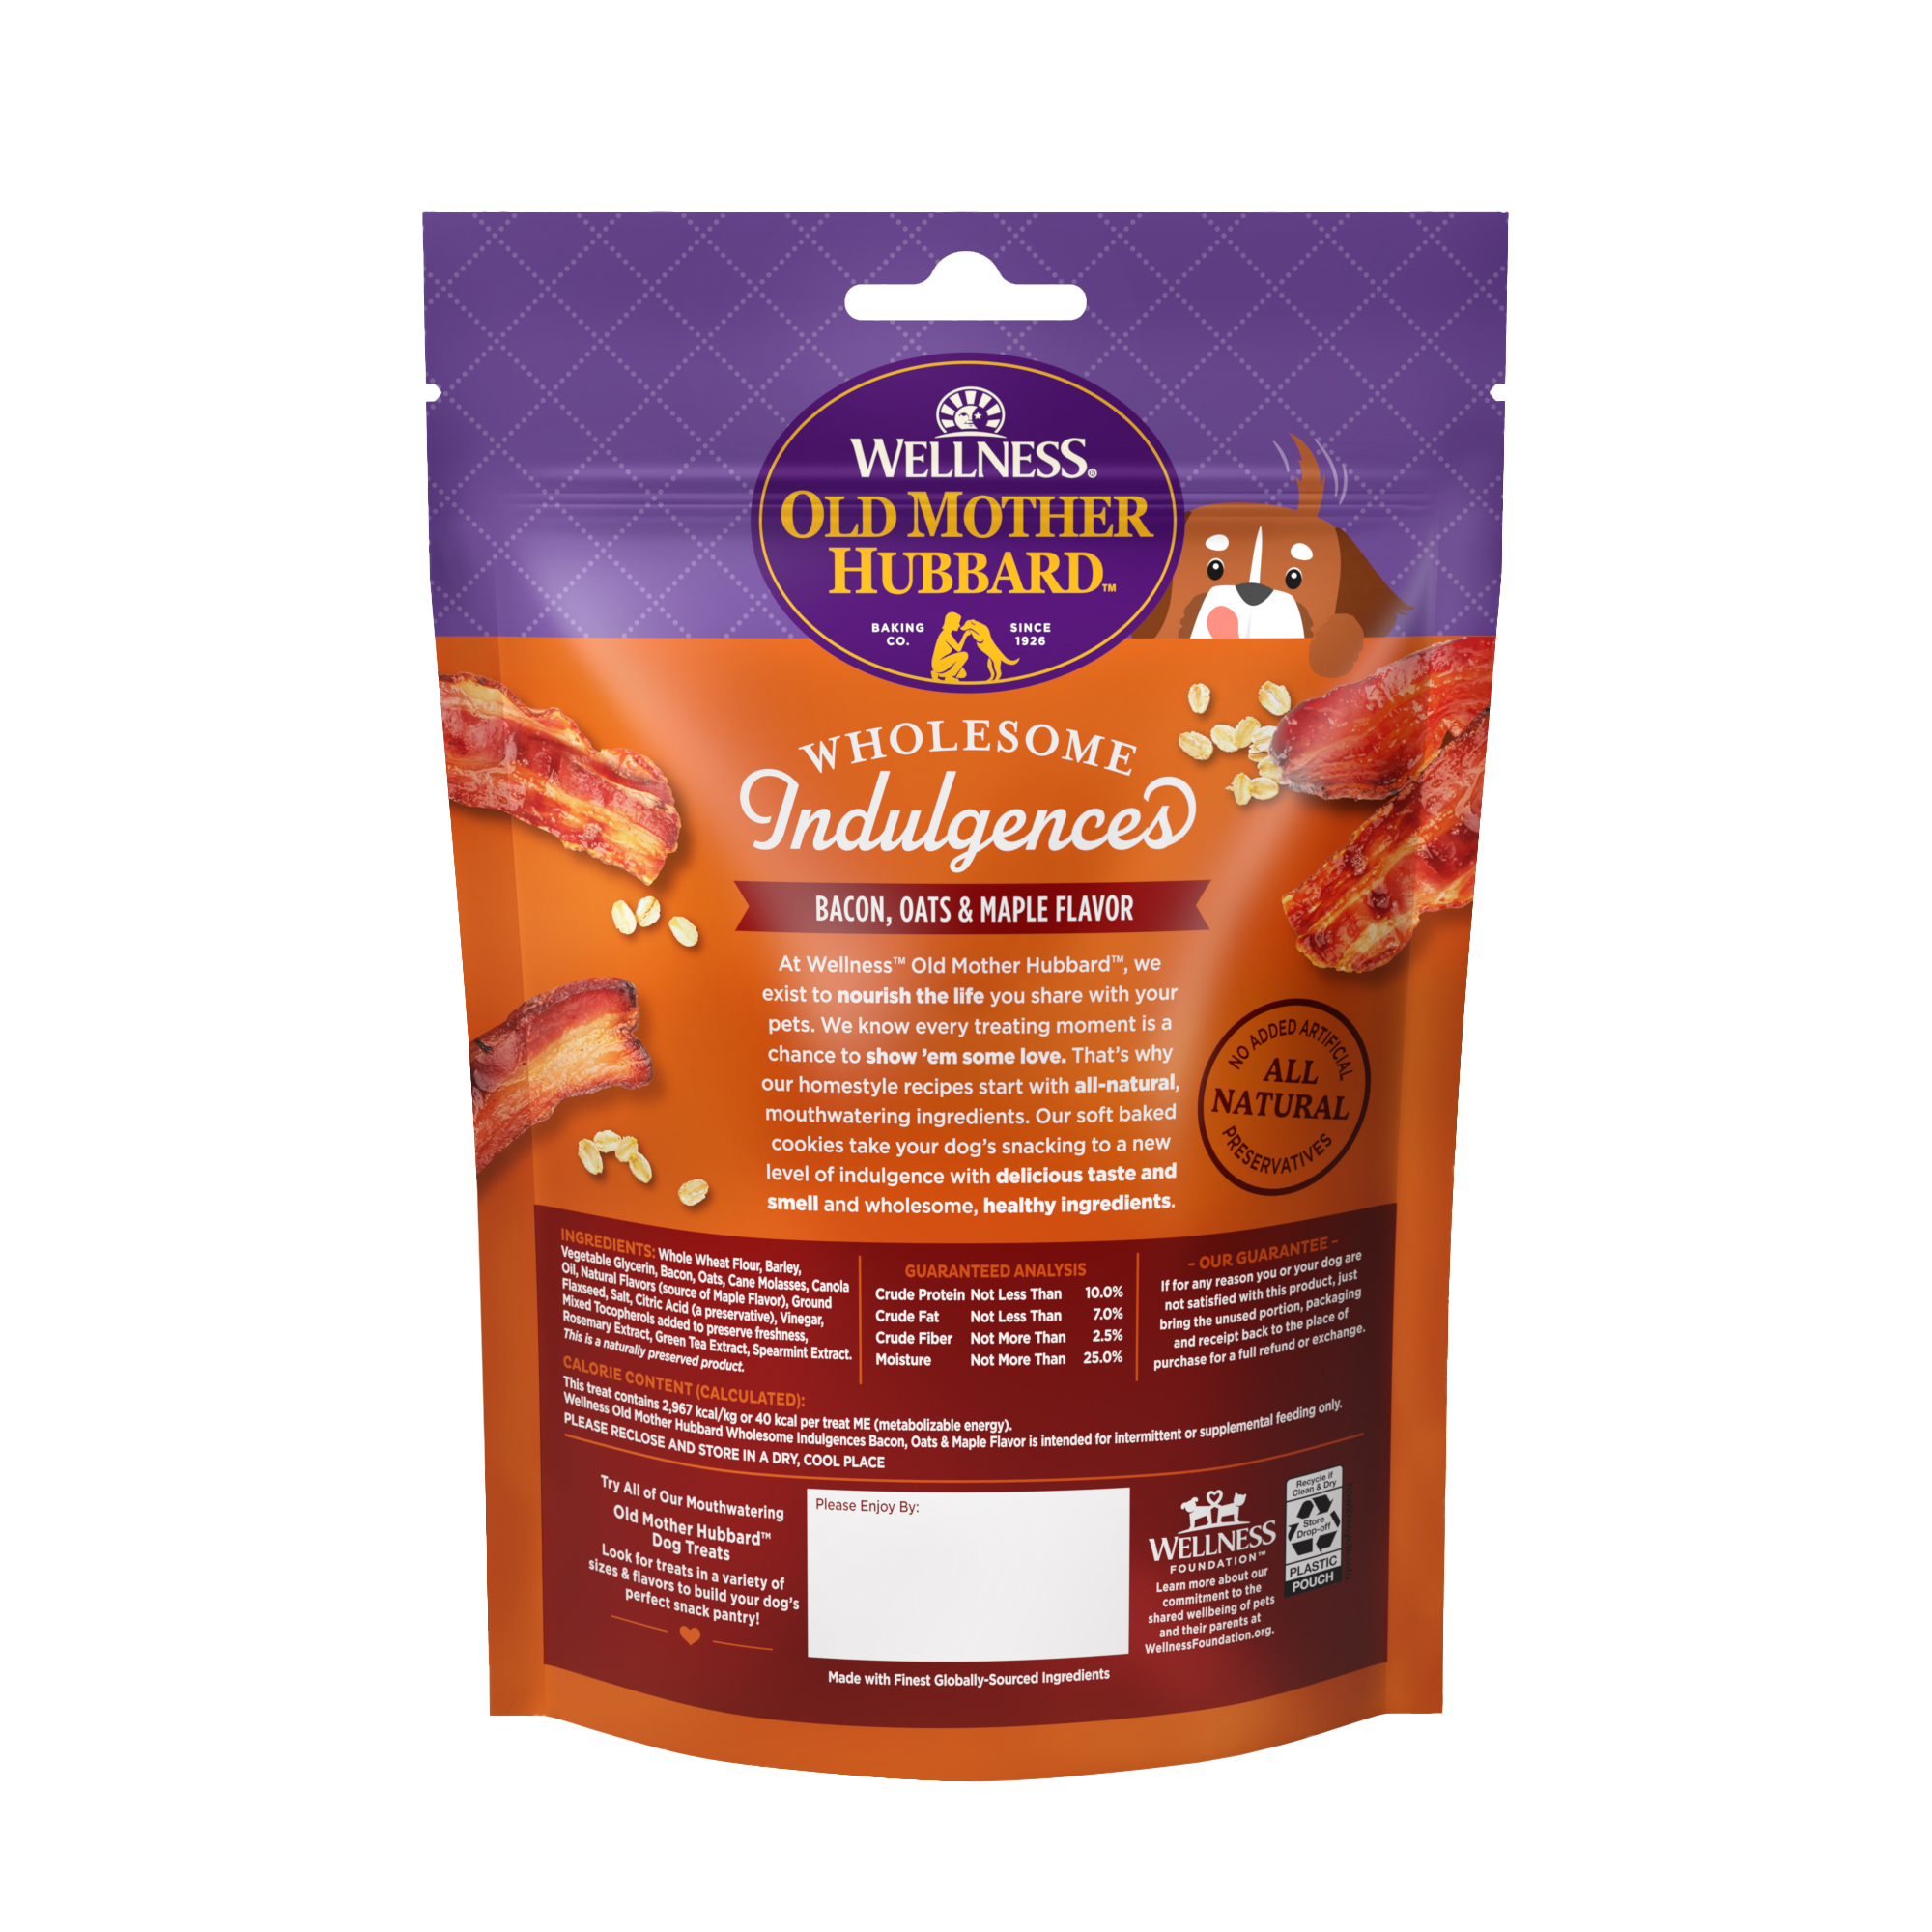 Old Mother Hubbard Wholesome Indulgences Bacon, Oats & Maple Flavor